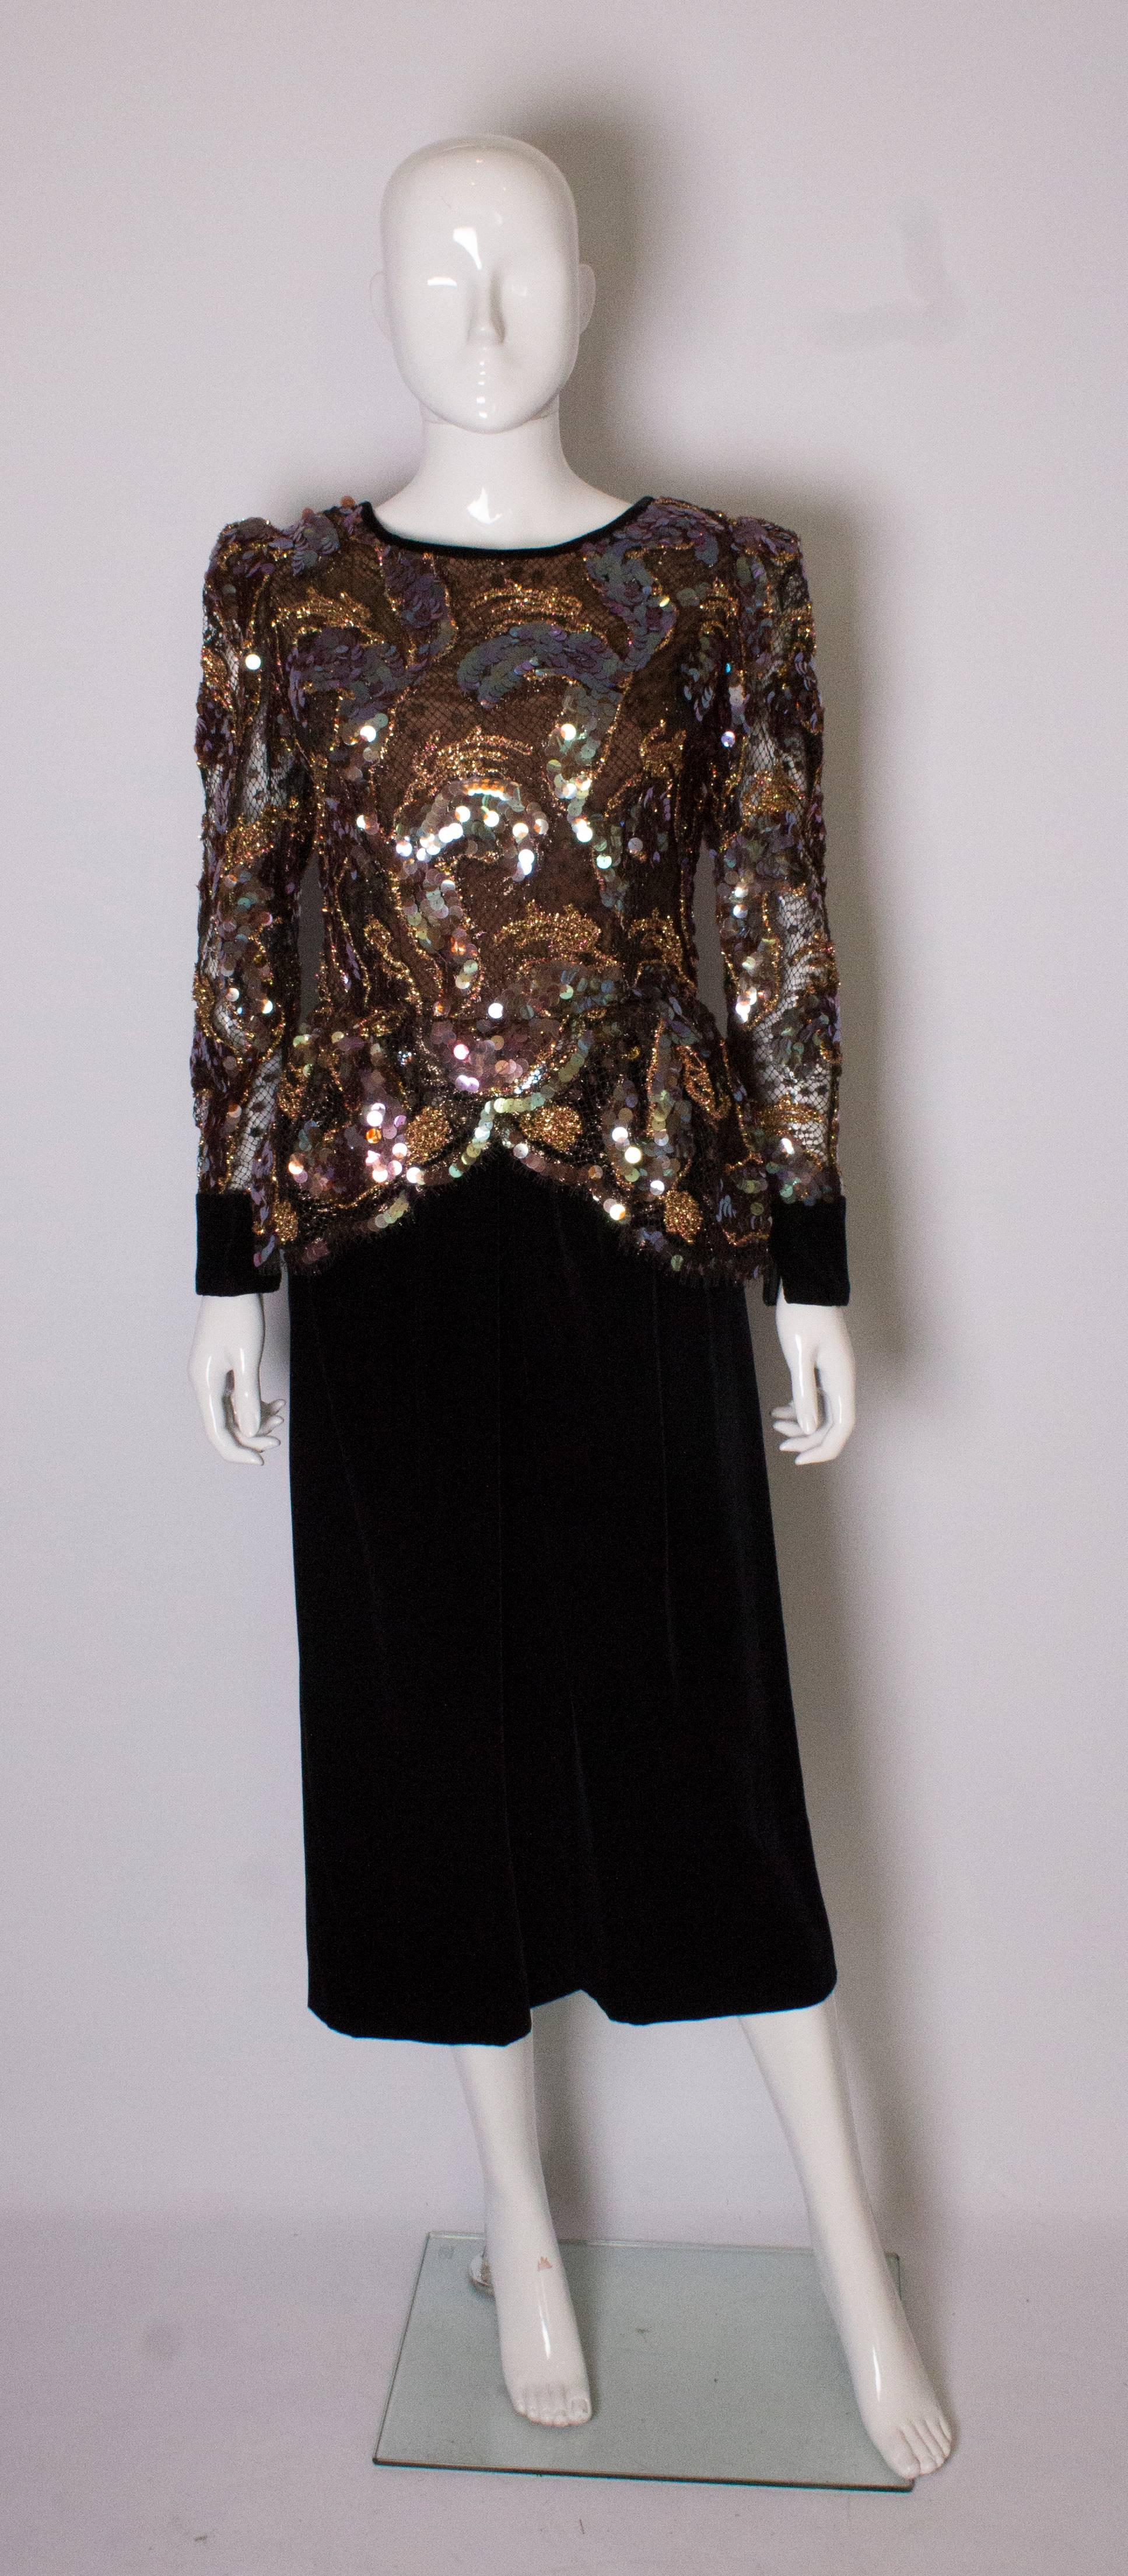 A stunning vintage  cocktail dress, the body is sequins and trim on net  ( lined) with the same fabric on the sleeves but unlined. The body has a wrap over peplum, and a scoop neckline at the back. The skirt is a rich brown velvet.